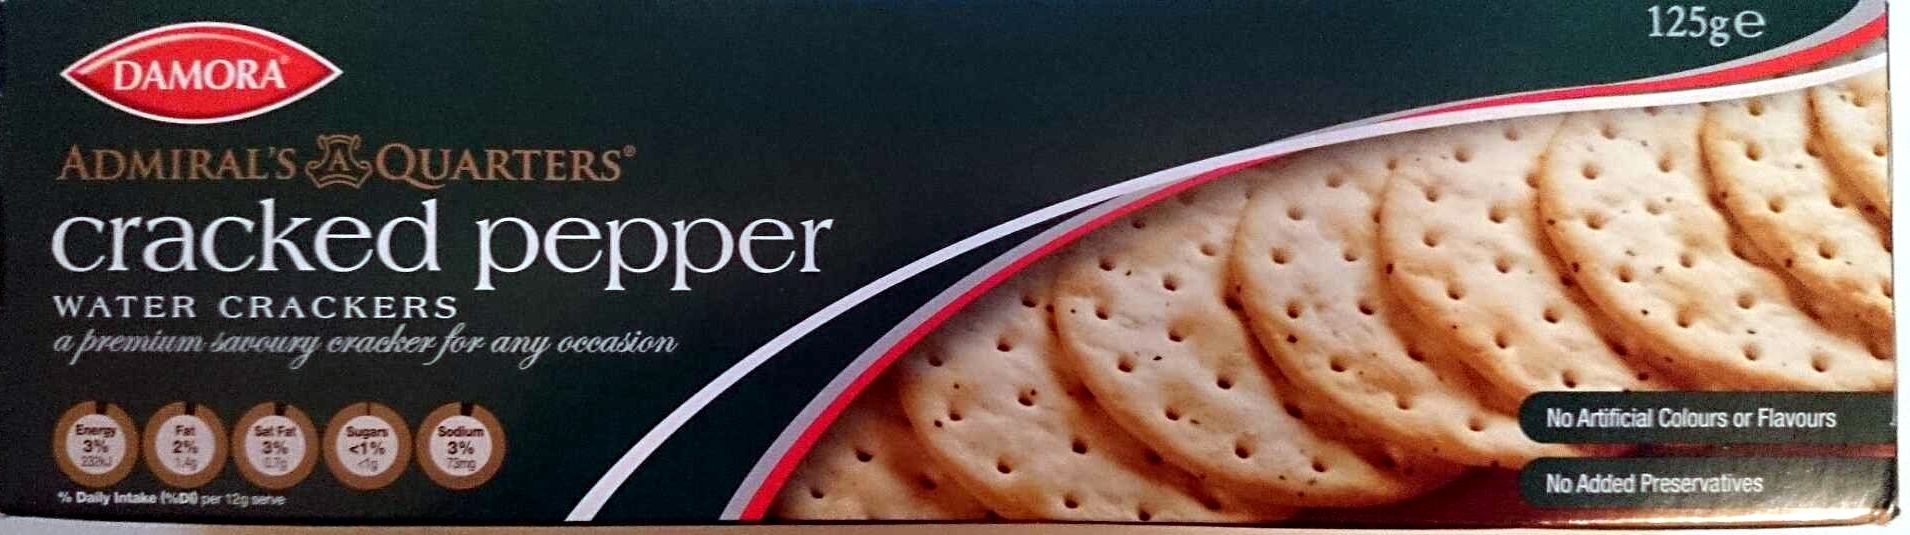 Cracked Pepper Water Crackers - Product